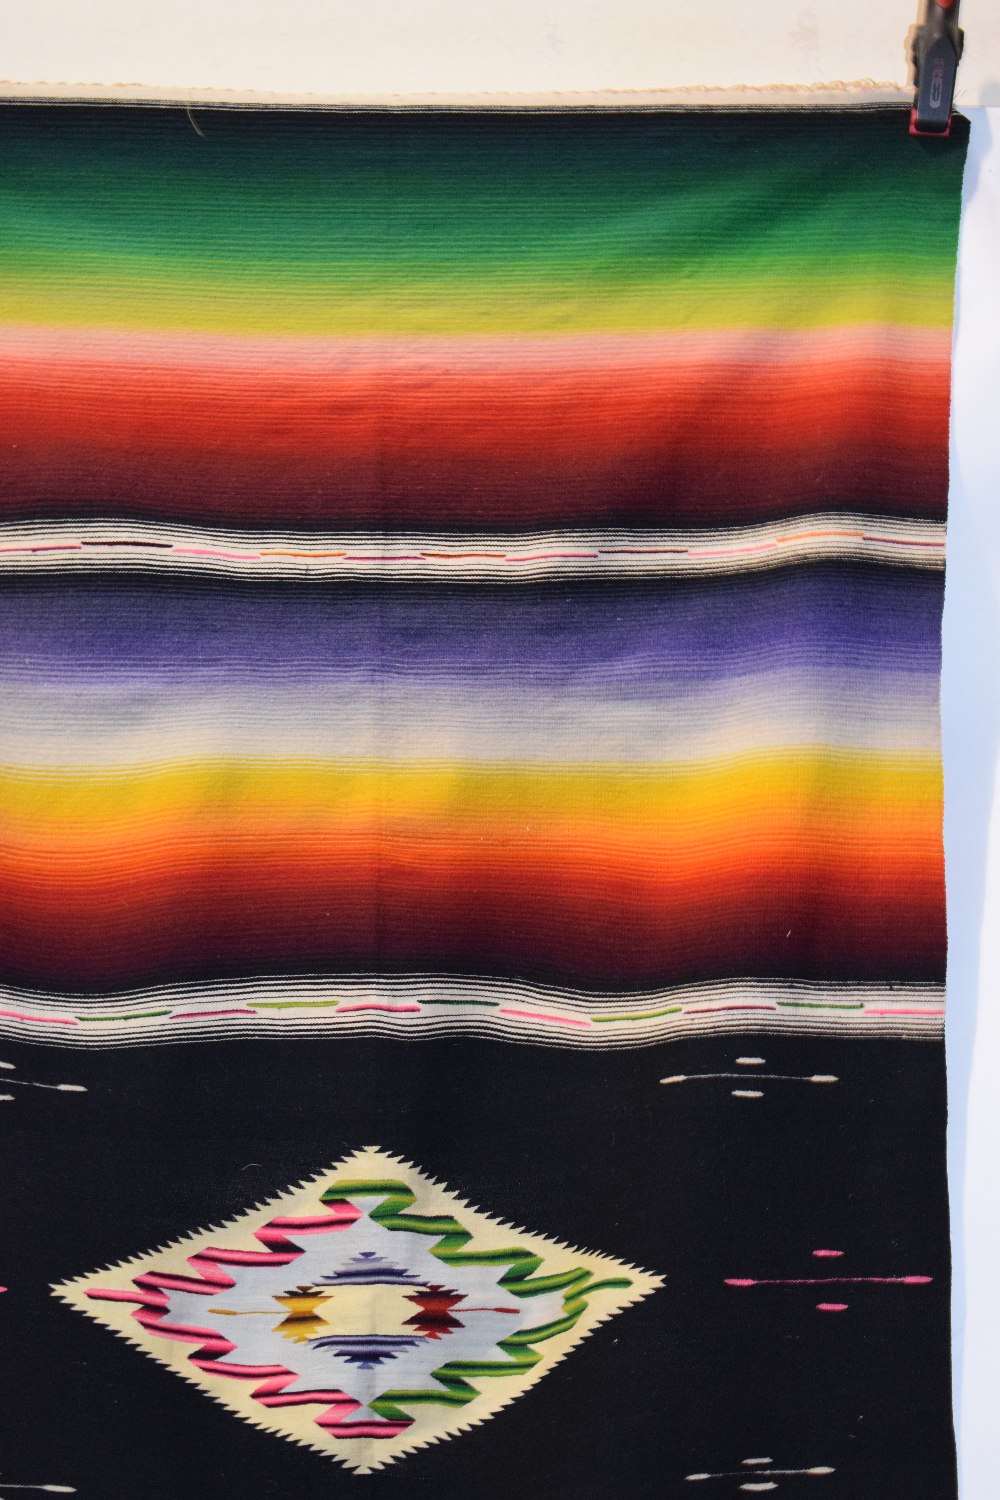 Mexican serape blanket, north America, mid-20th century, 68in. X 32in. 1.73m. X 0.81m. Woven in - Image 3 of 7